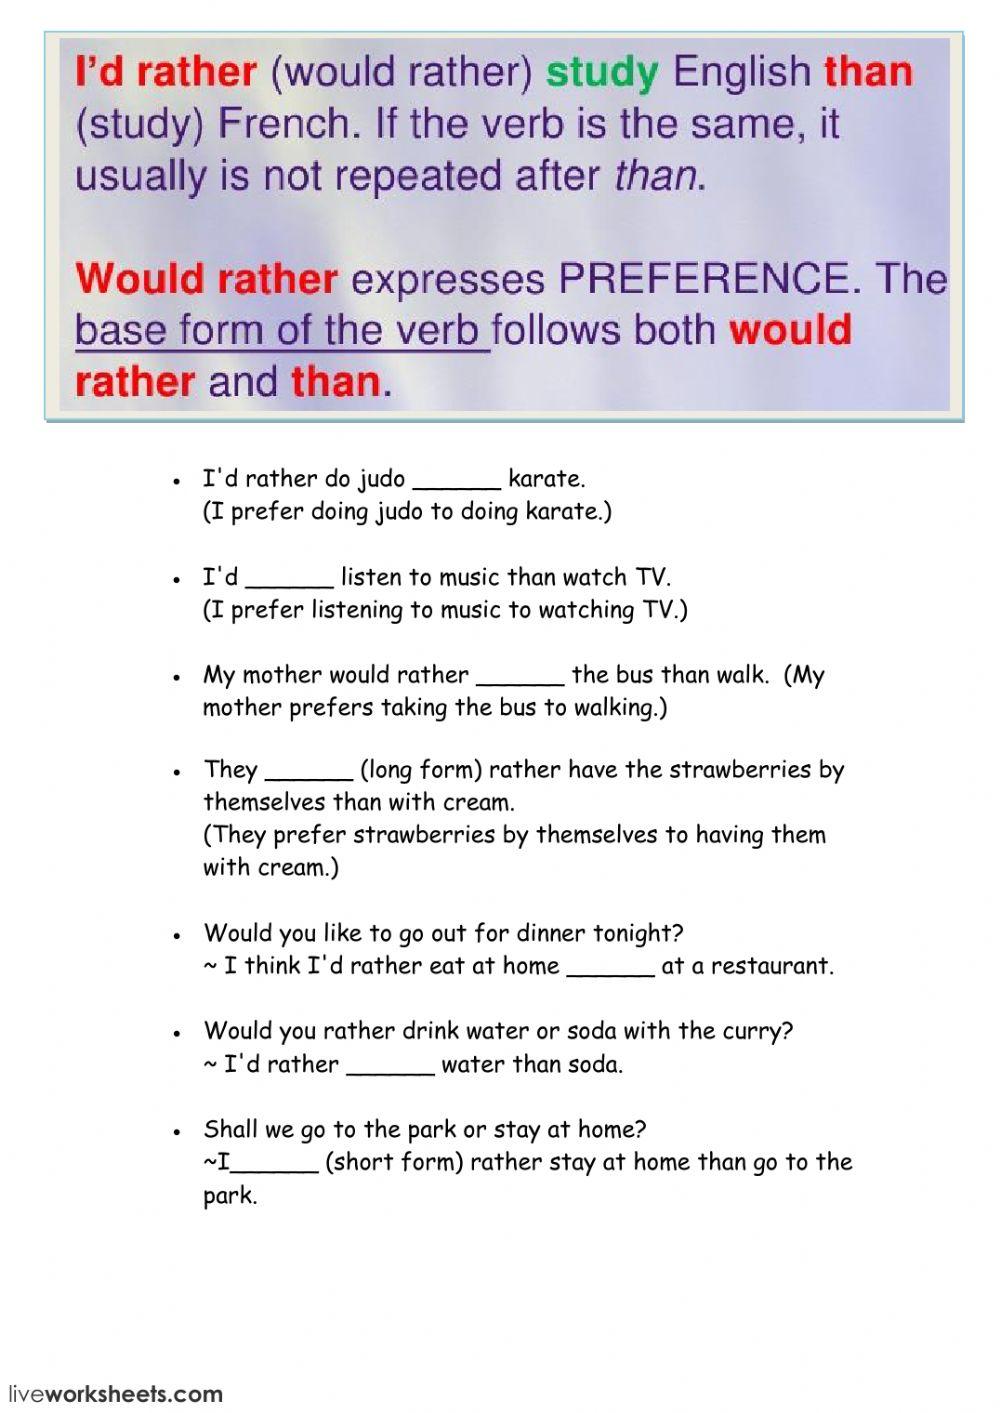 Expressing preference with -rather...than-